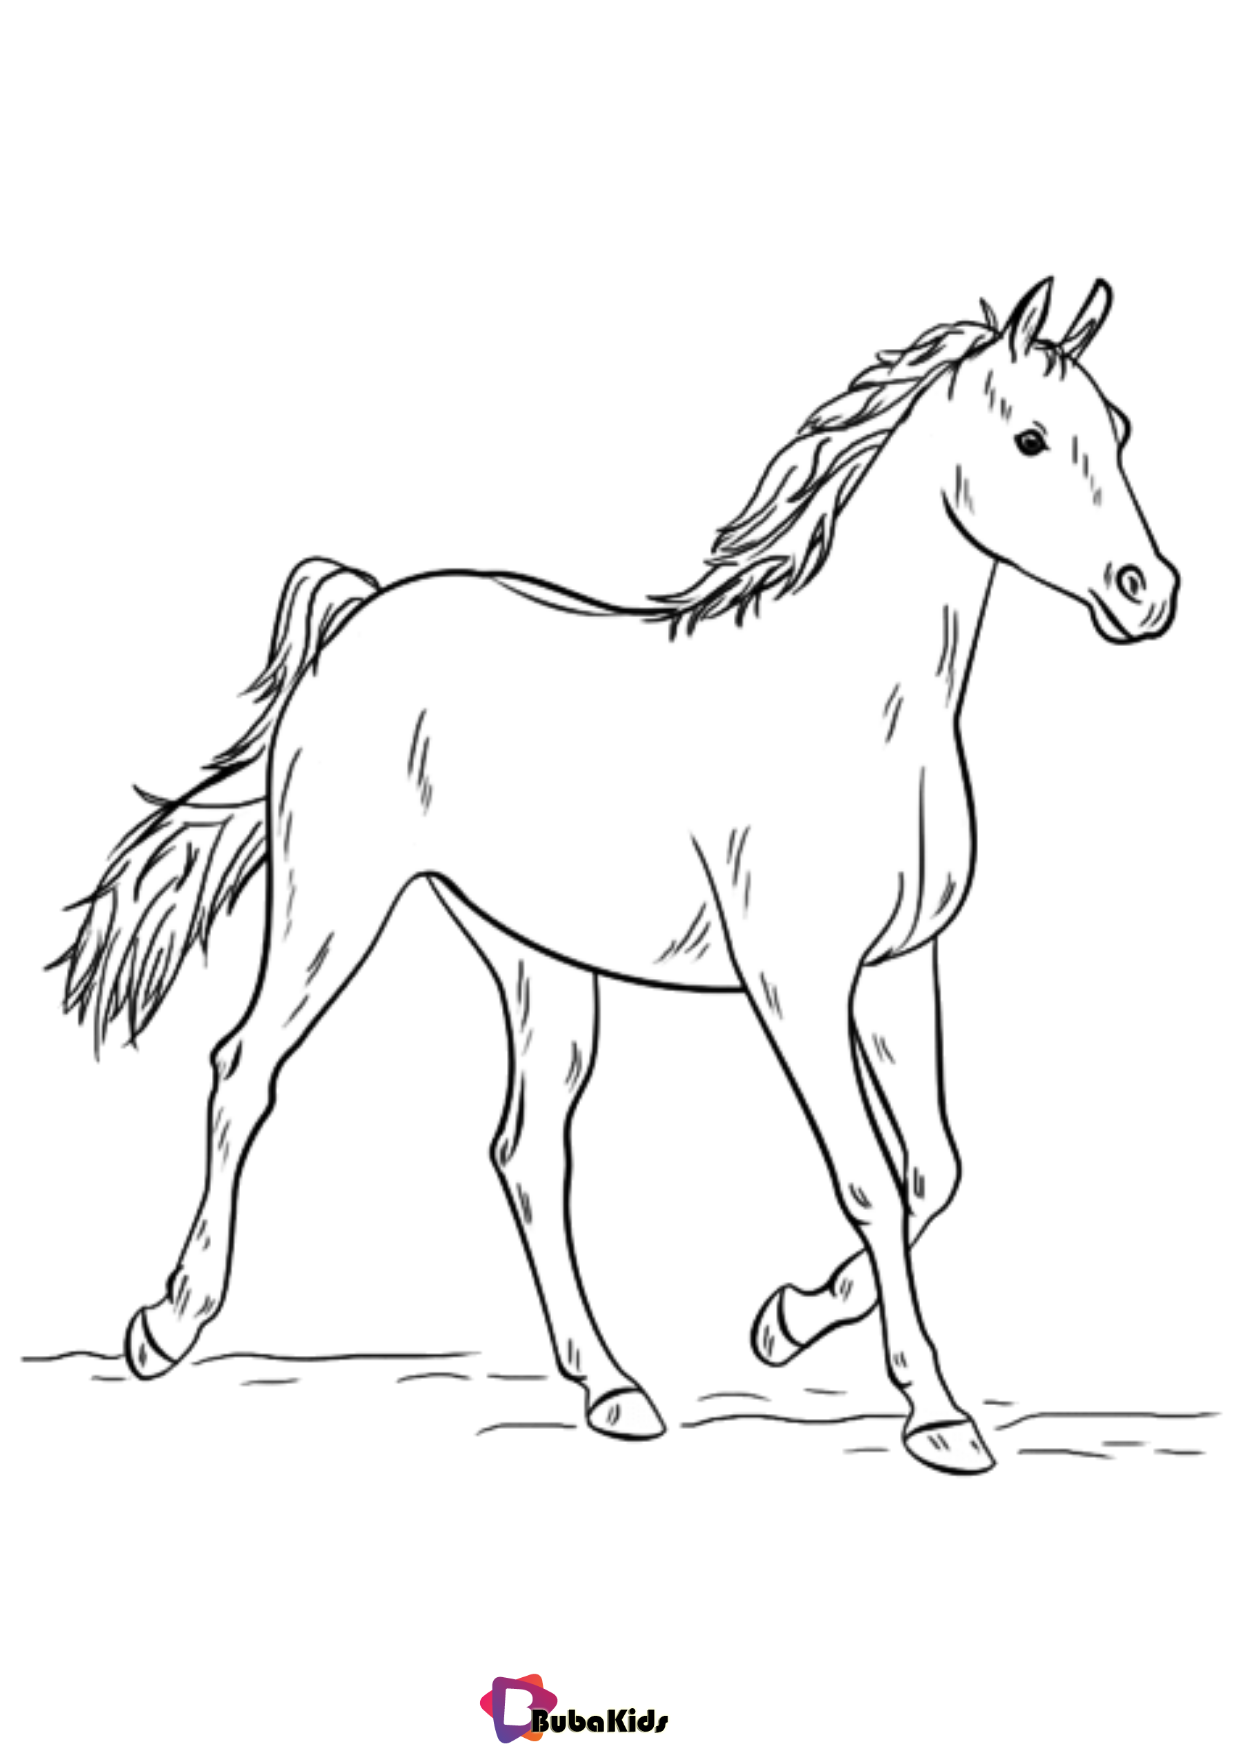 Animal coloring pages Horse coloring pages